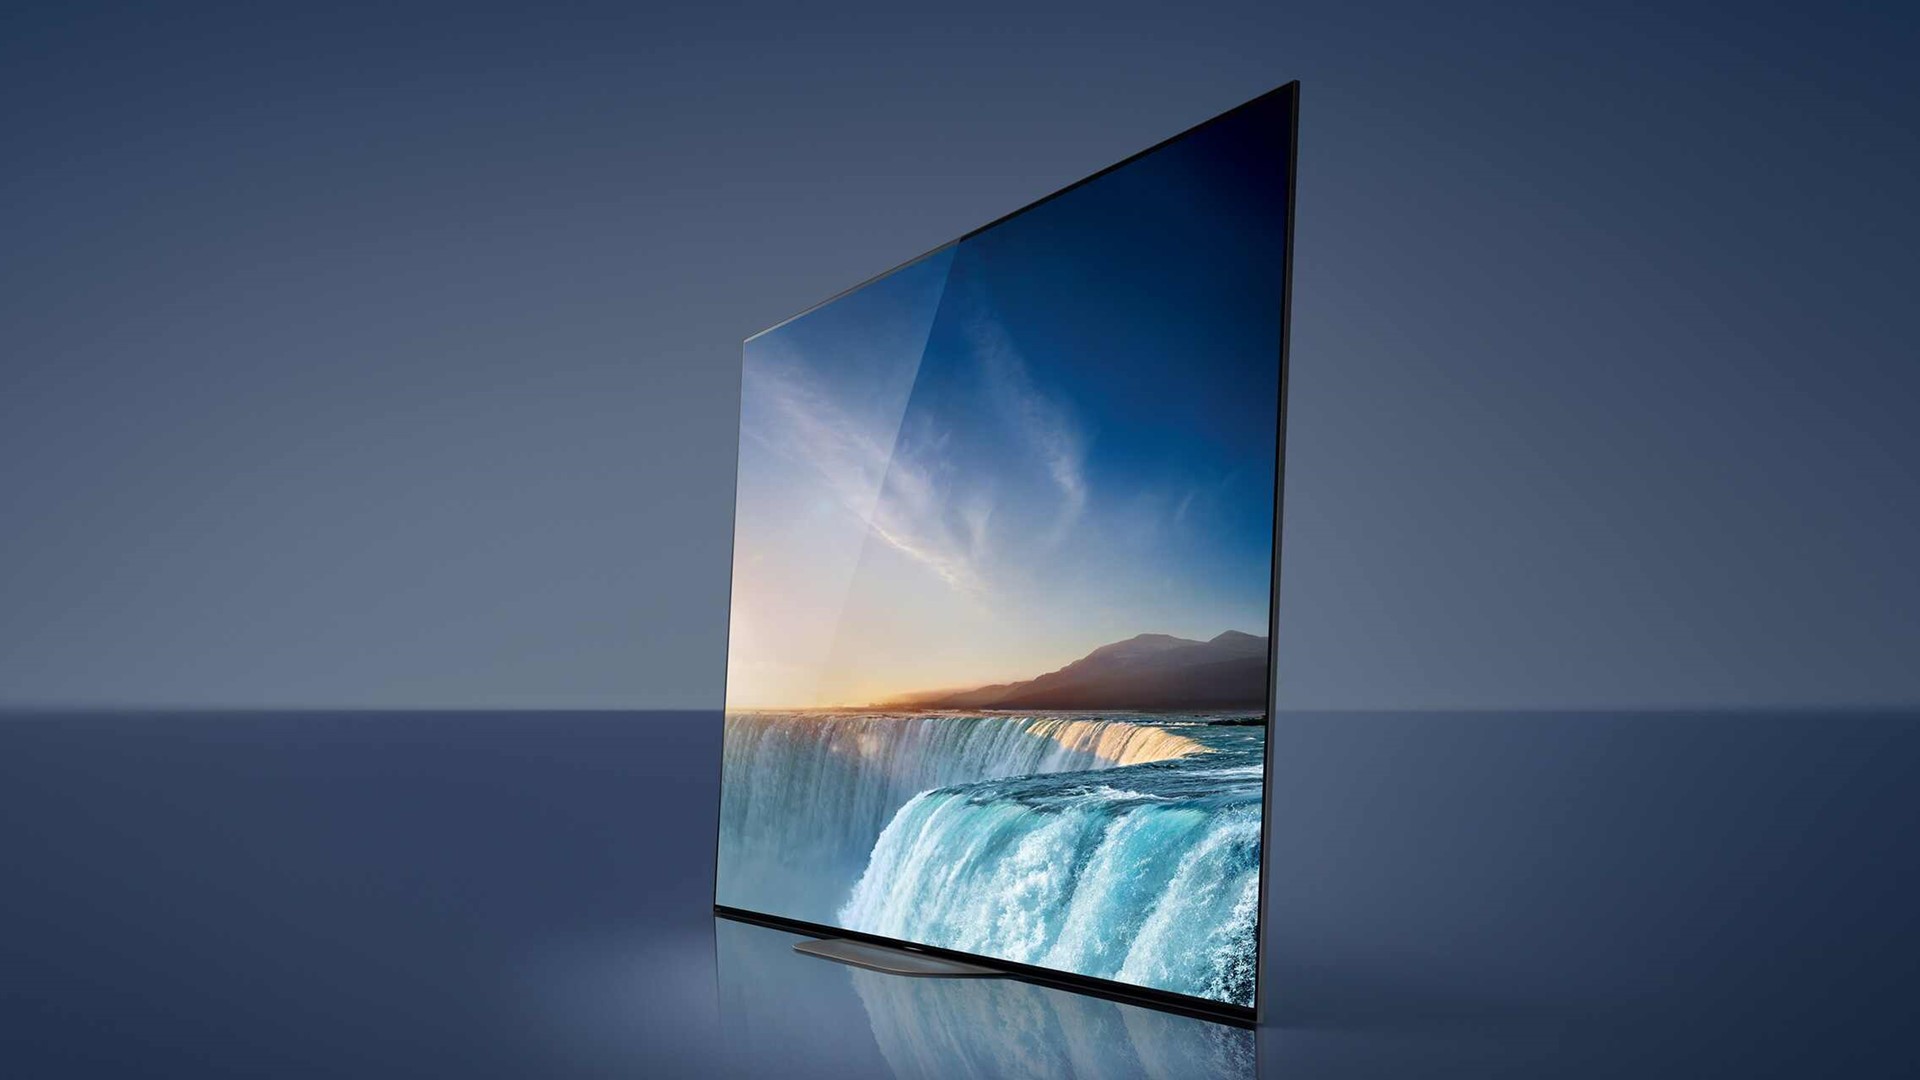 The Sony A9G 4K OLED against a plain blue background